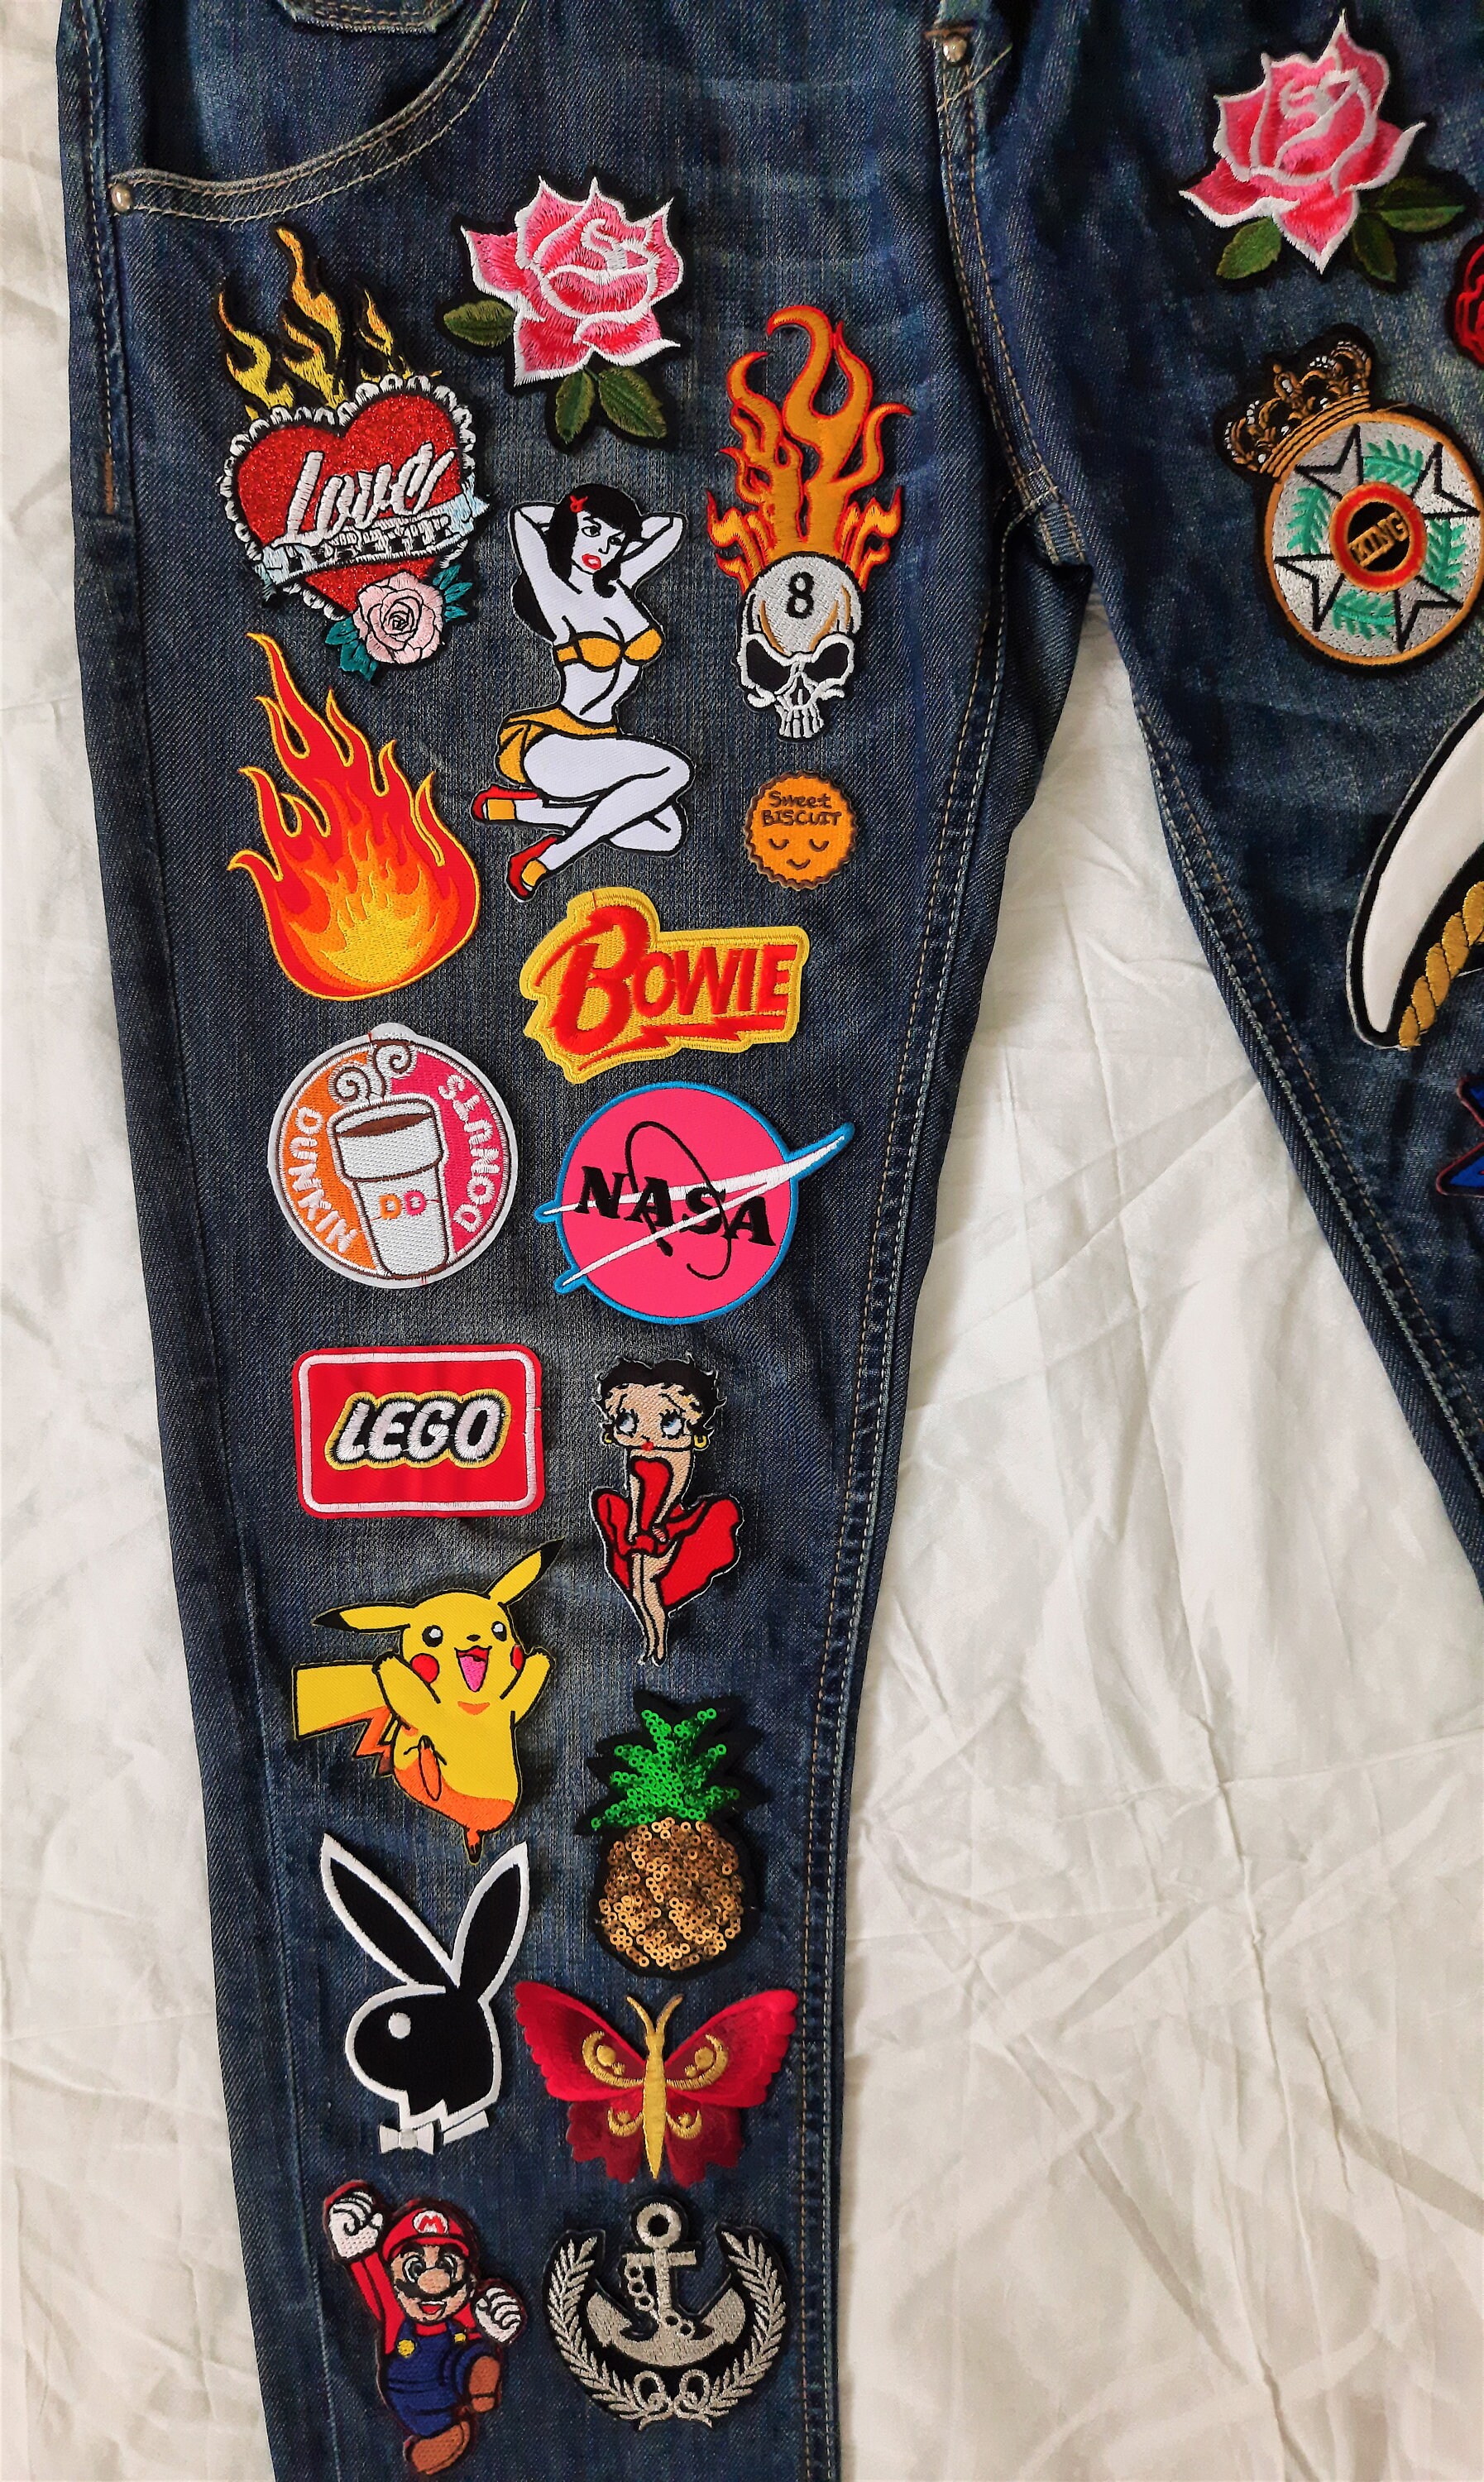 Patched Denim / Upcycled Jeans with Patches / Hand Reworked | Etsy